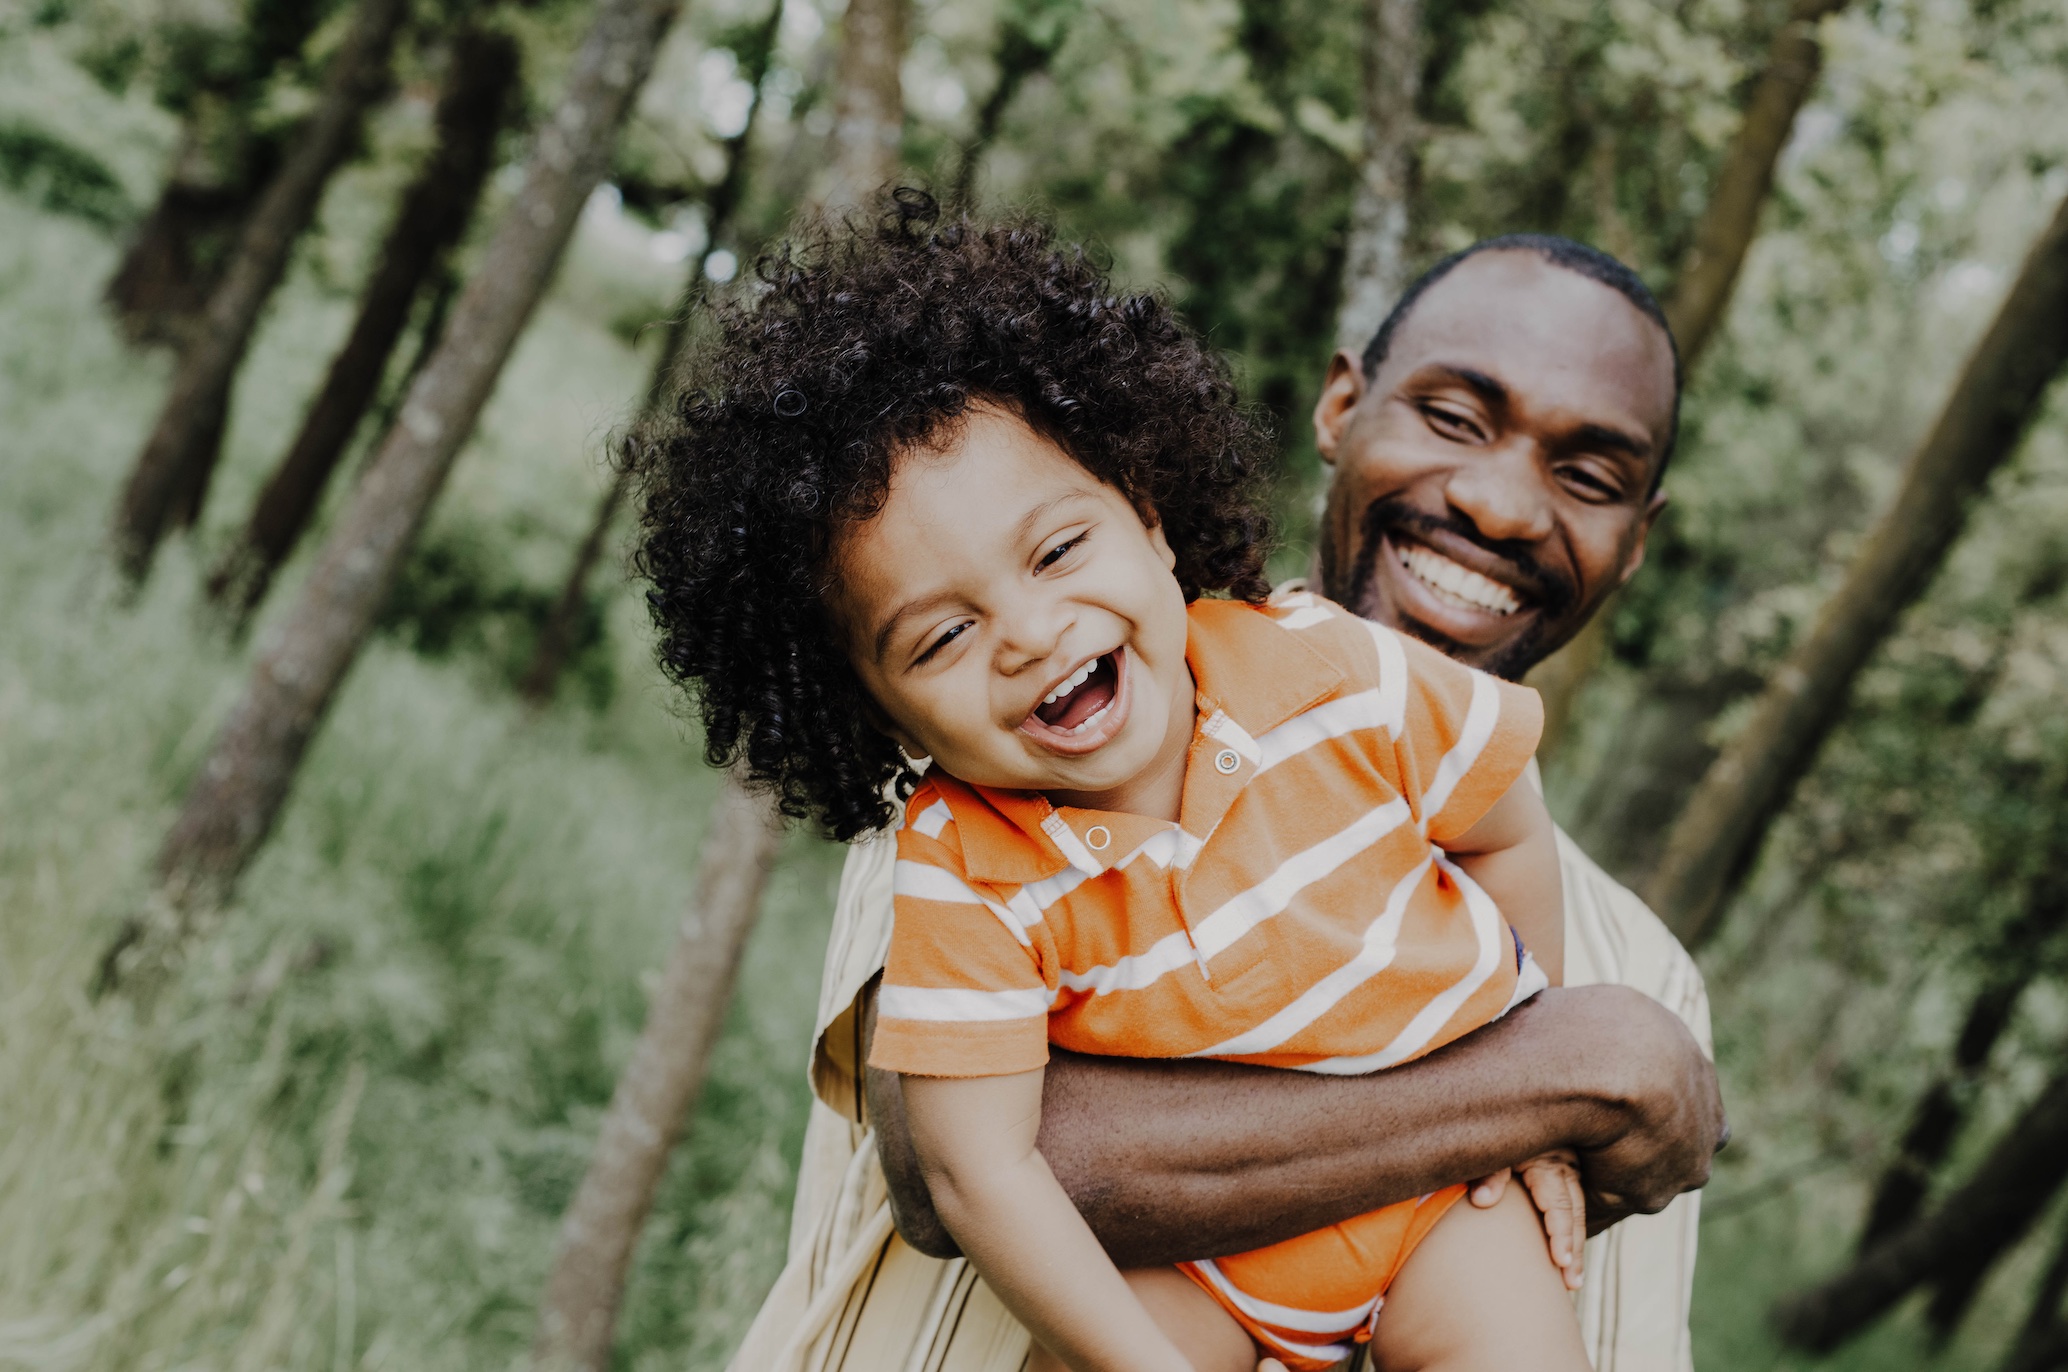 Laughing child in father's arms; image by Joice Kelly, via Unsplash.com.